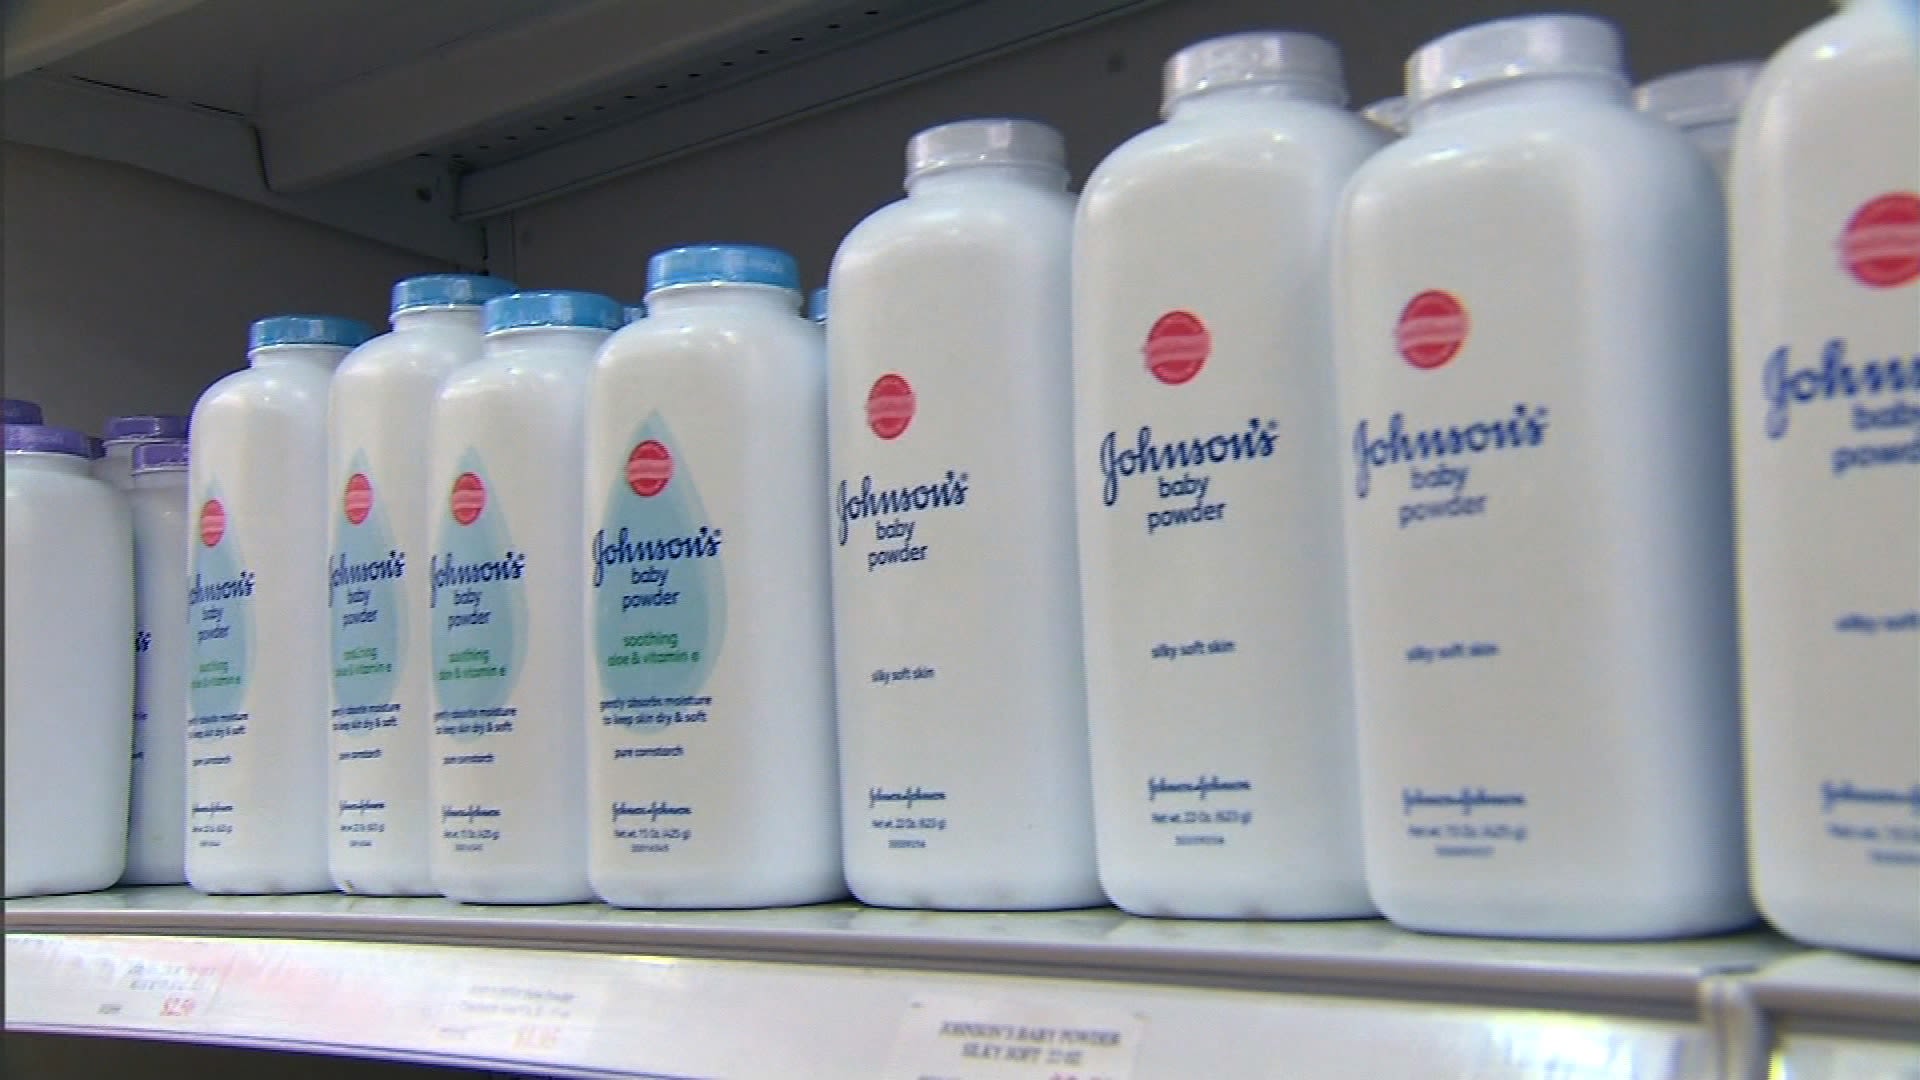 Johnson & Johnson to stop selling baby powder in US and Canada, Pharmaceuticals industry